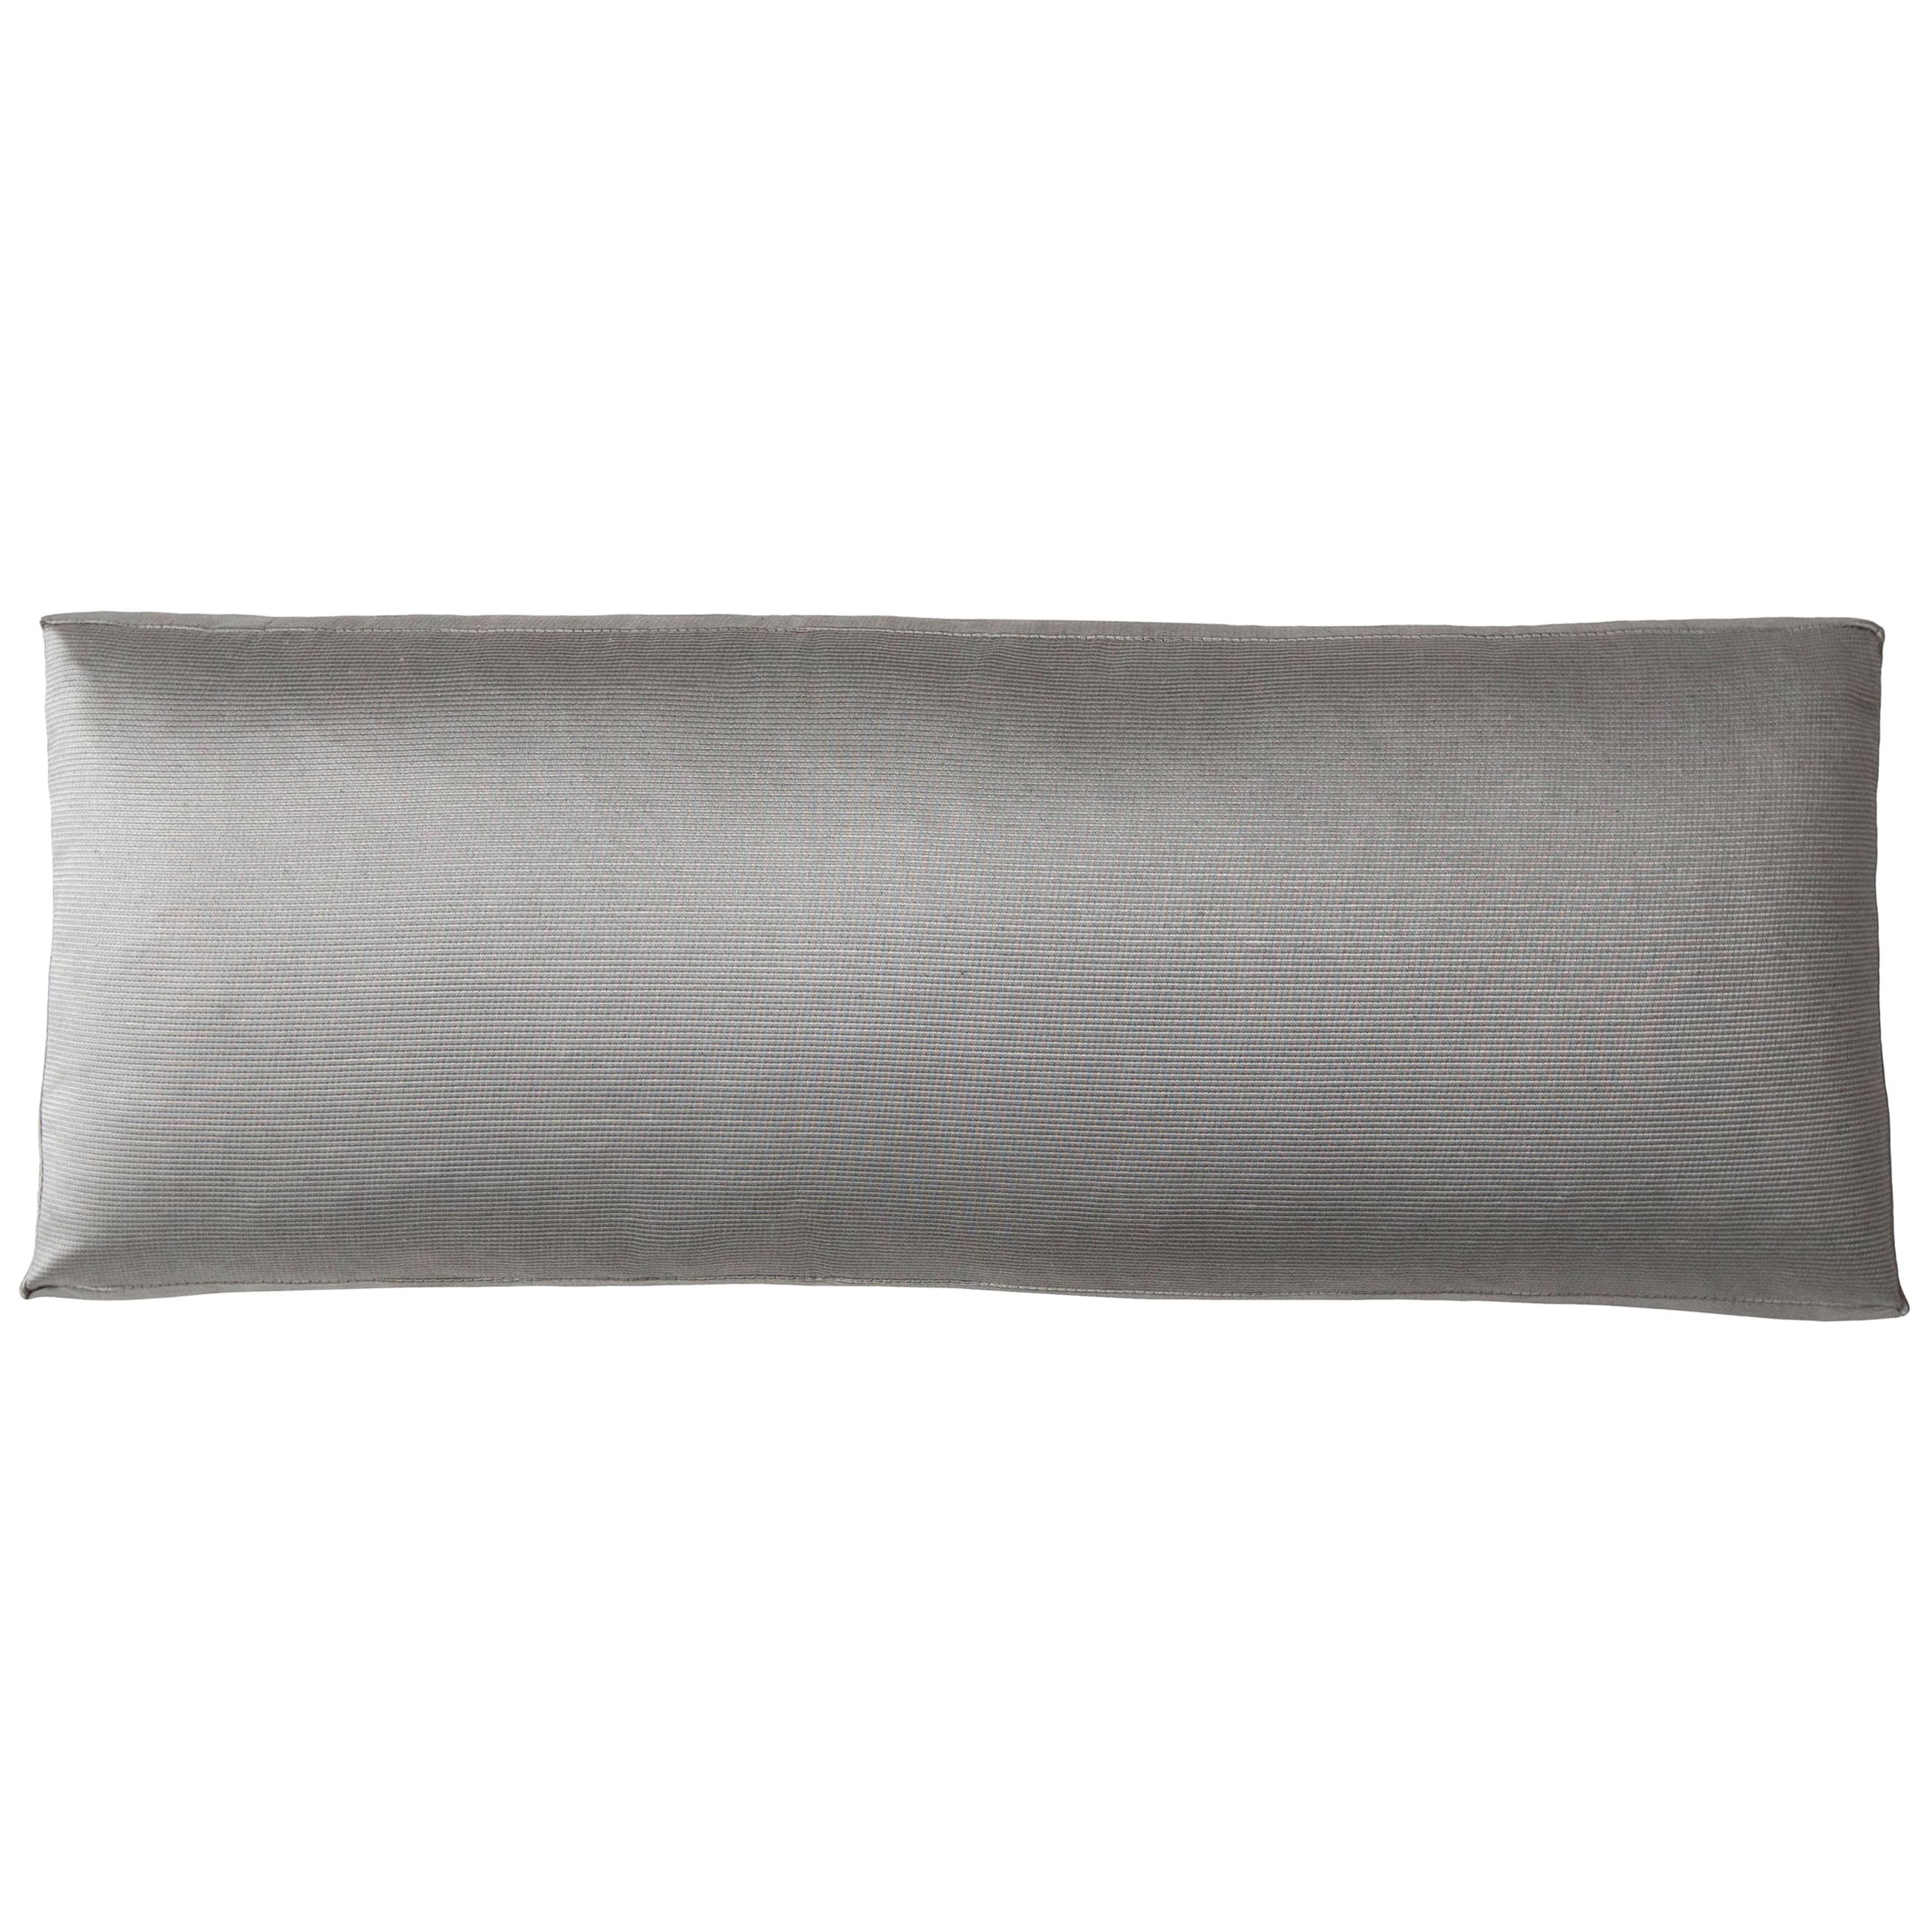 Handcrafted Lustrous Fabric Subtle Sheen Rectangular Box Pillow Hypoallergenic For Sale